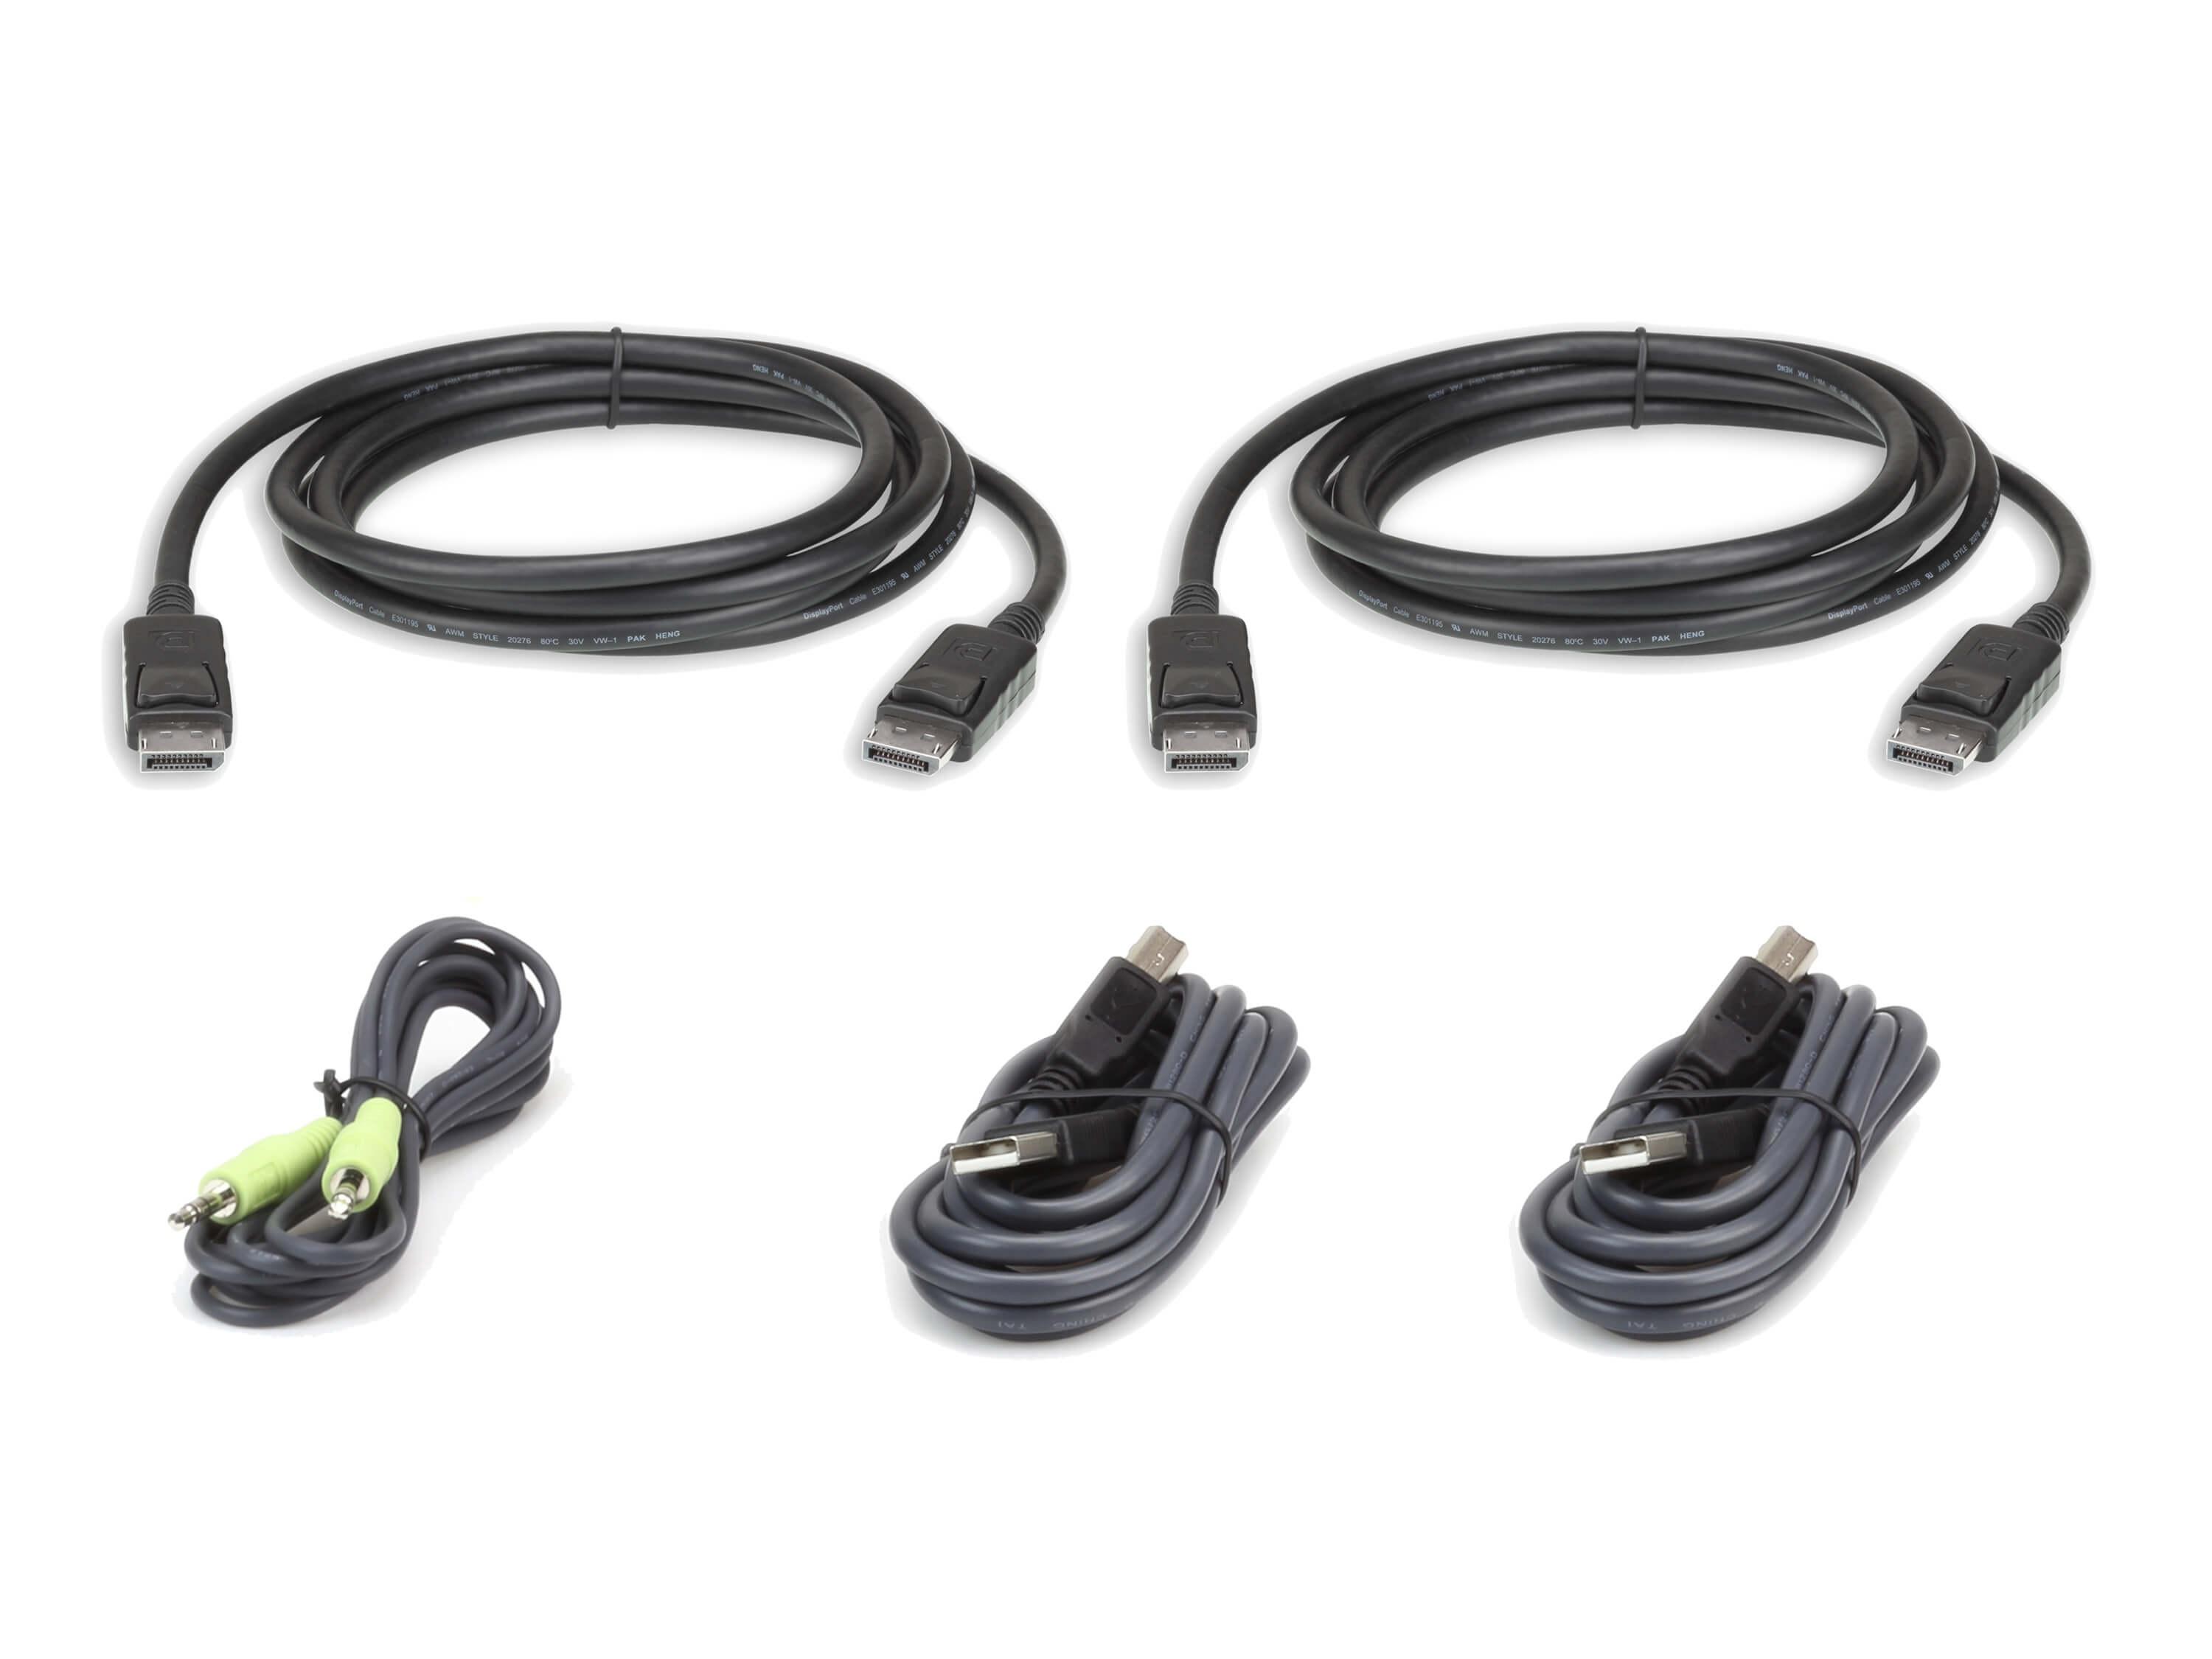 2L-7D03UDPX5 3m USB DisplayPort Dual Display Secure KVM Cable Kit by Aten